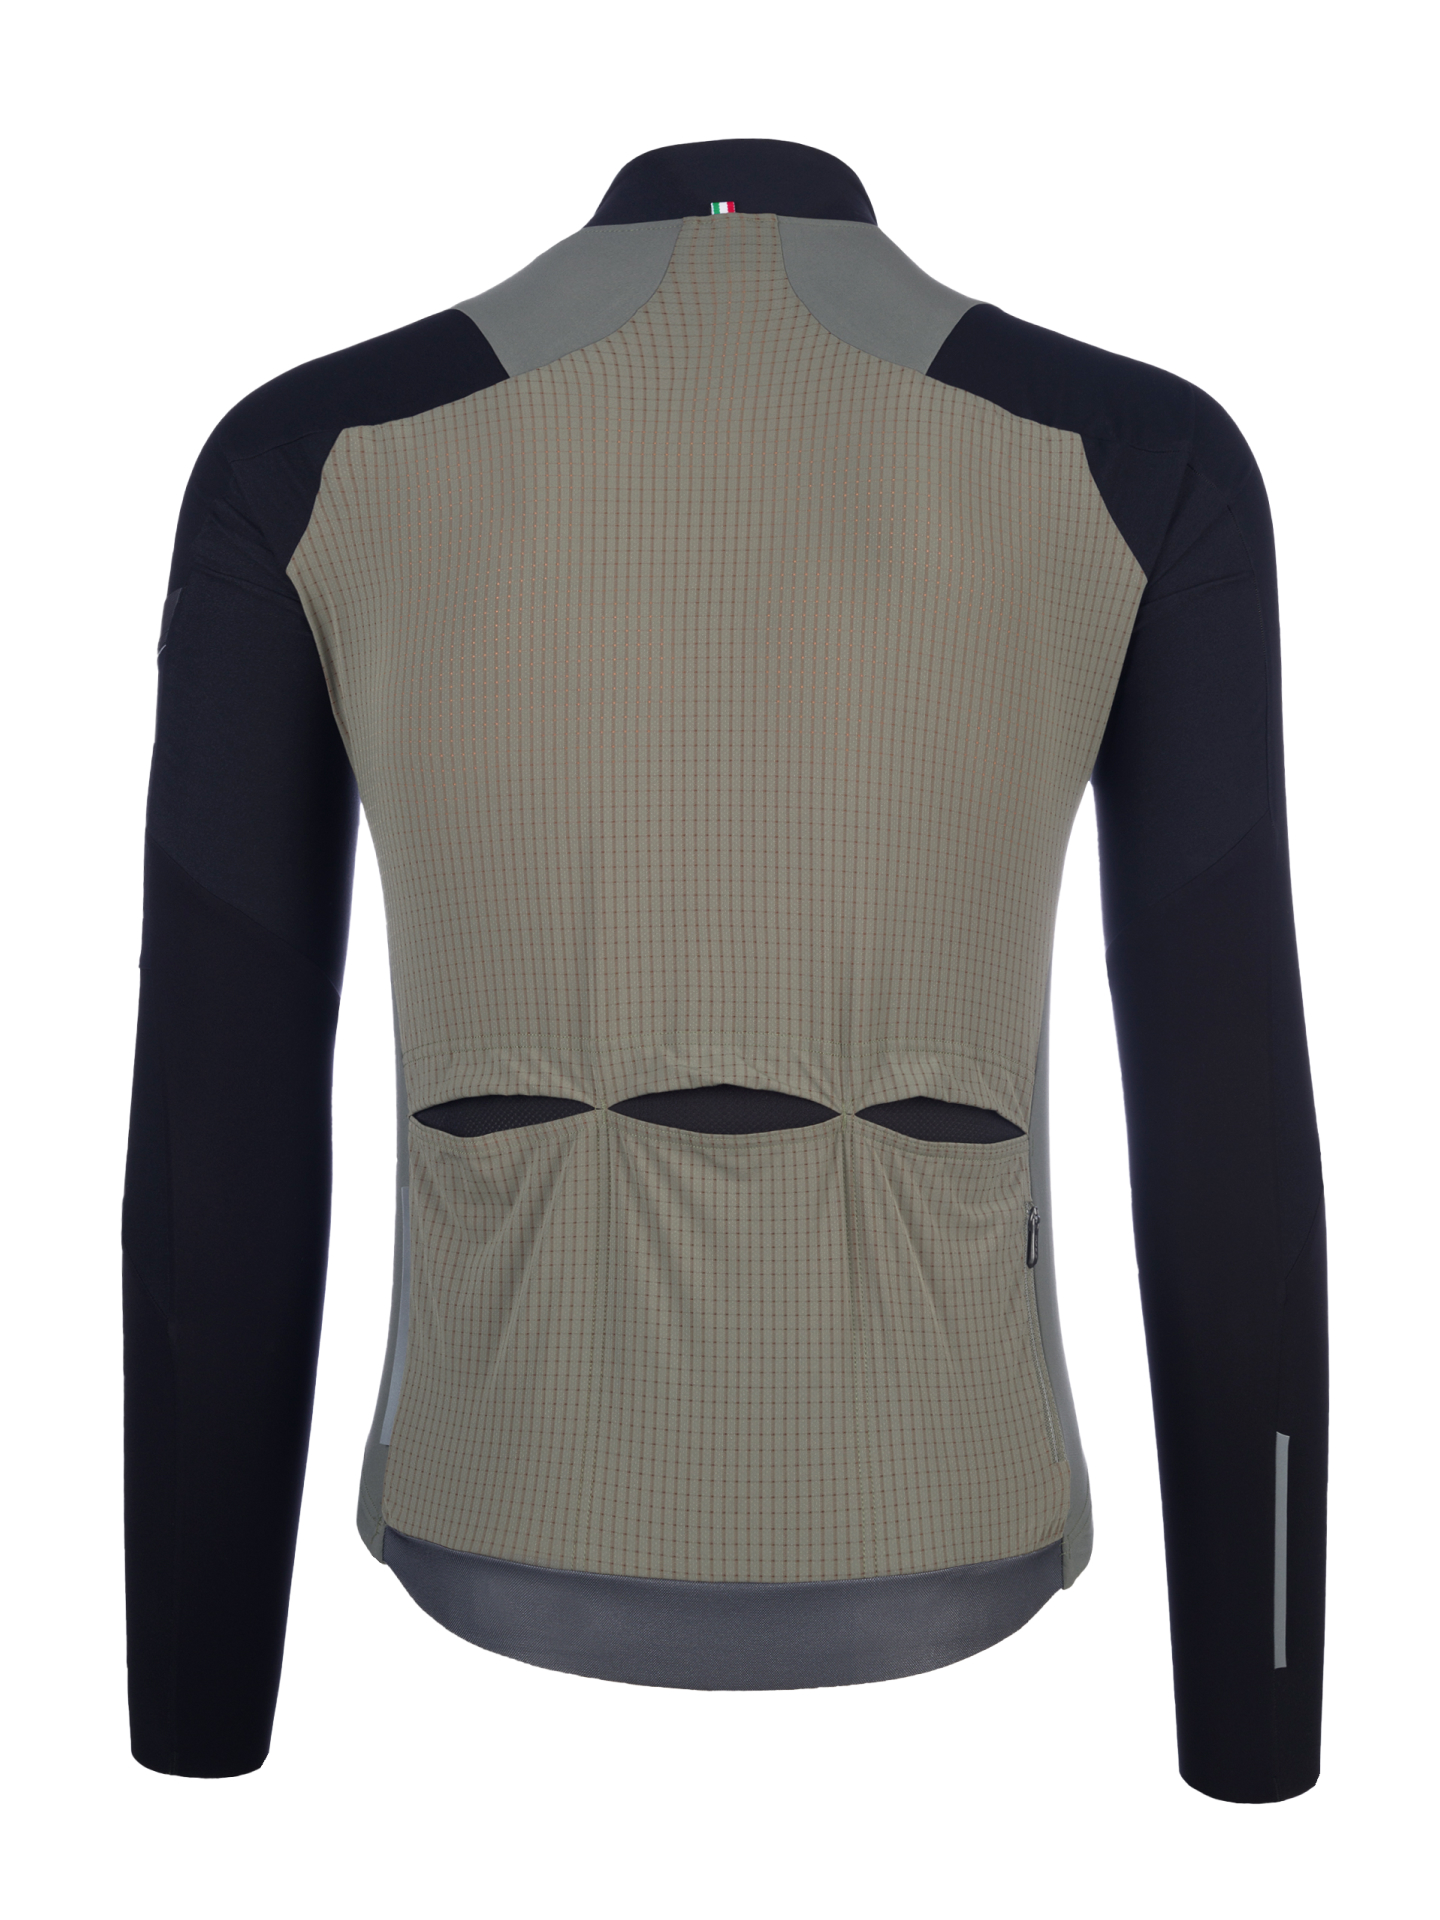 Men's Long Sleeve Seamless Sweater - All in Motion Black M